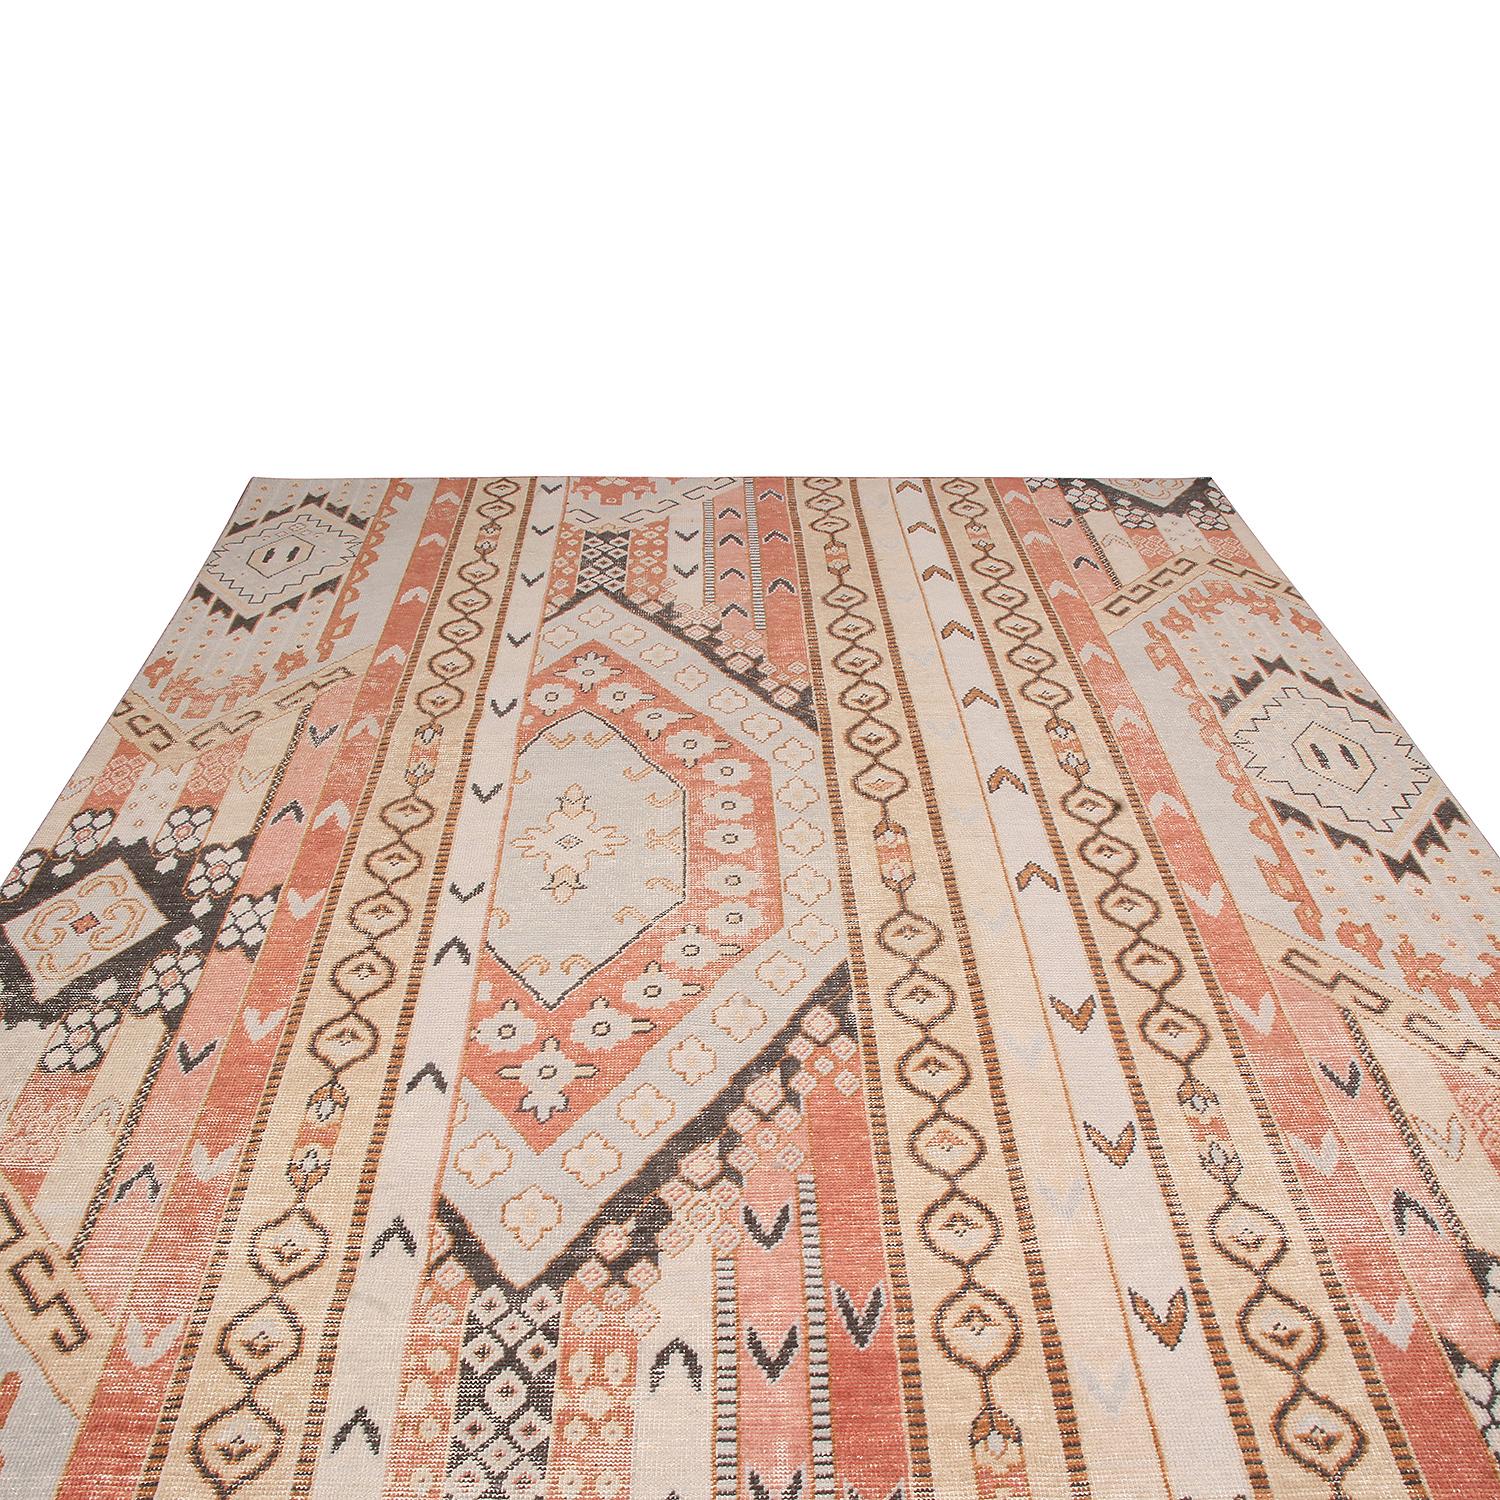 Hand knotted in high-quality wool originating from India, this geometric-floral rug is the latest addition to Rug & Kilim’s Homage Collection, enjoying a finer take on distressed shabby chic aesthetic with fewer knots per square inch. One of the